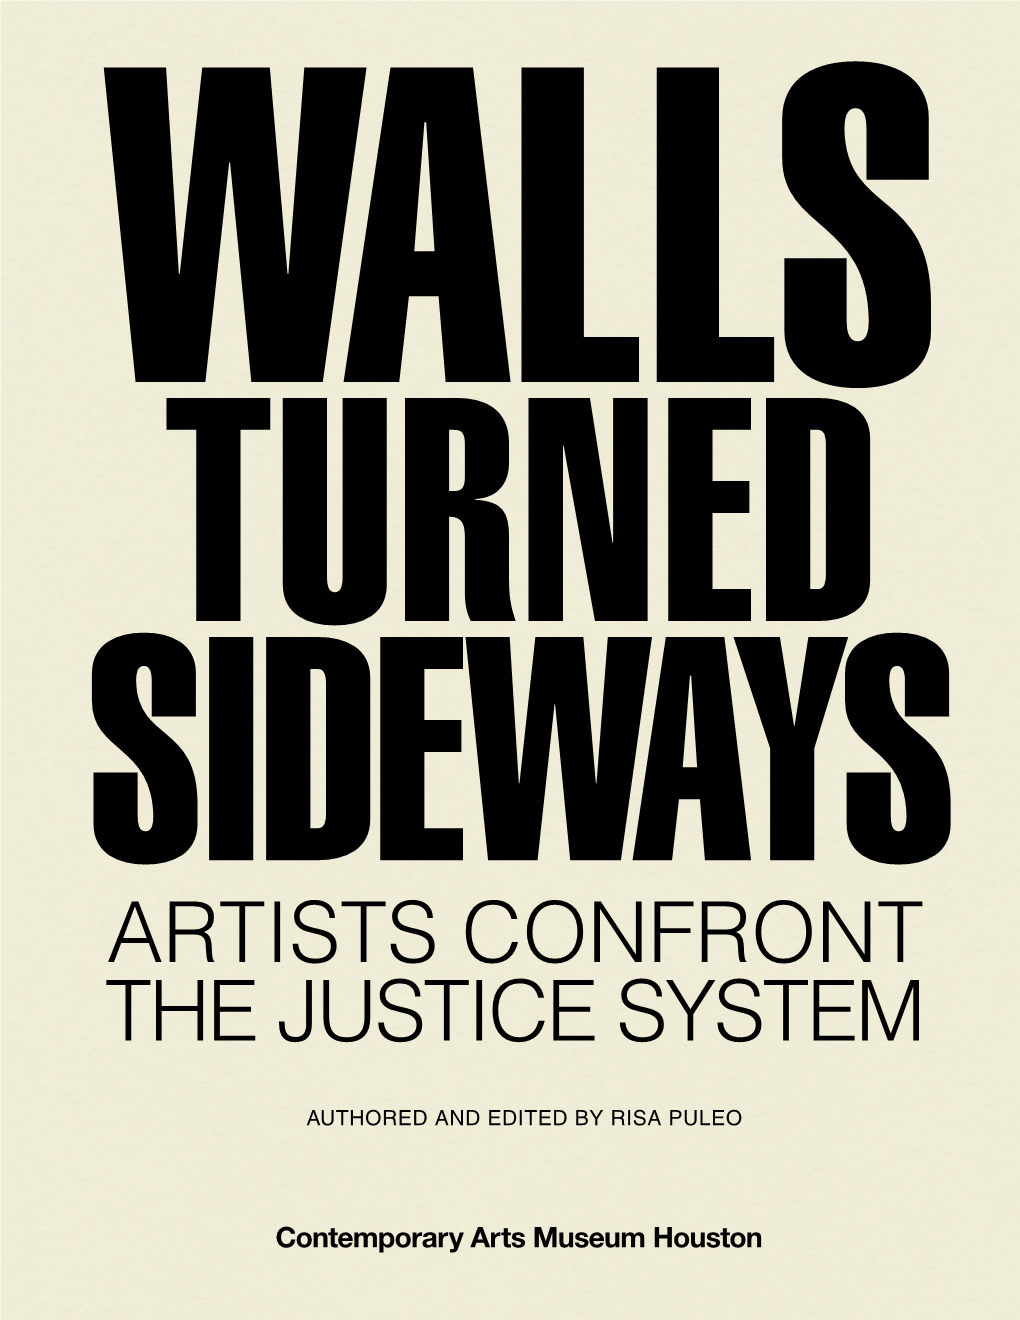 Artists Confront the Justice System, by Risa Puleo